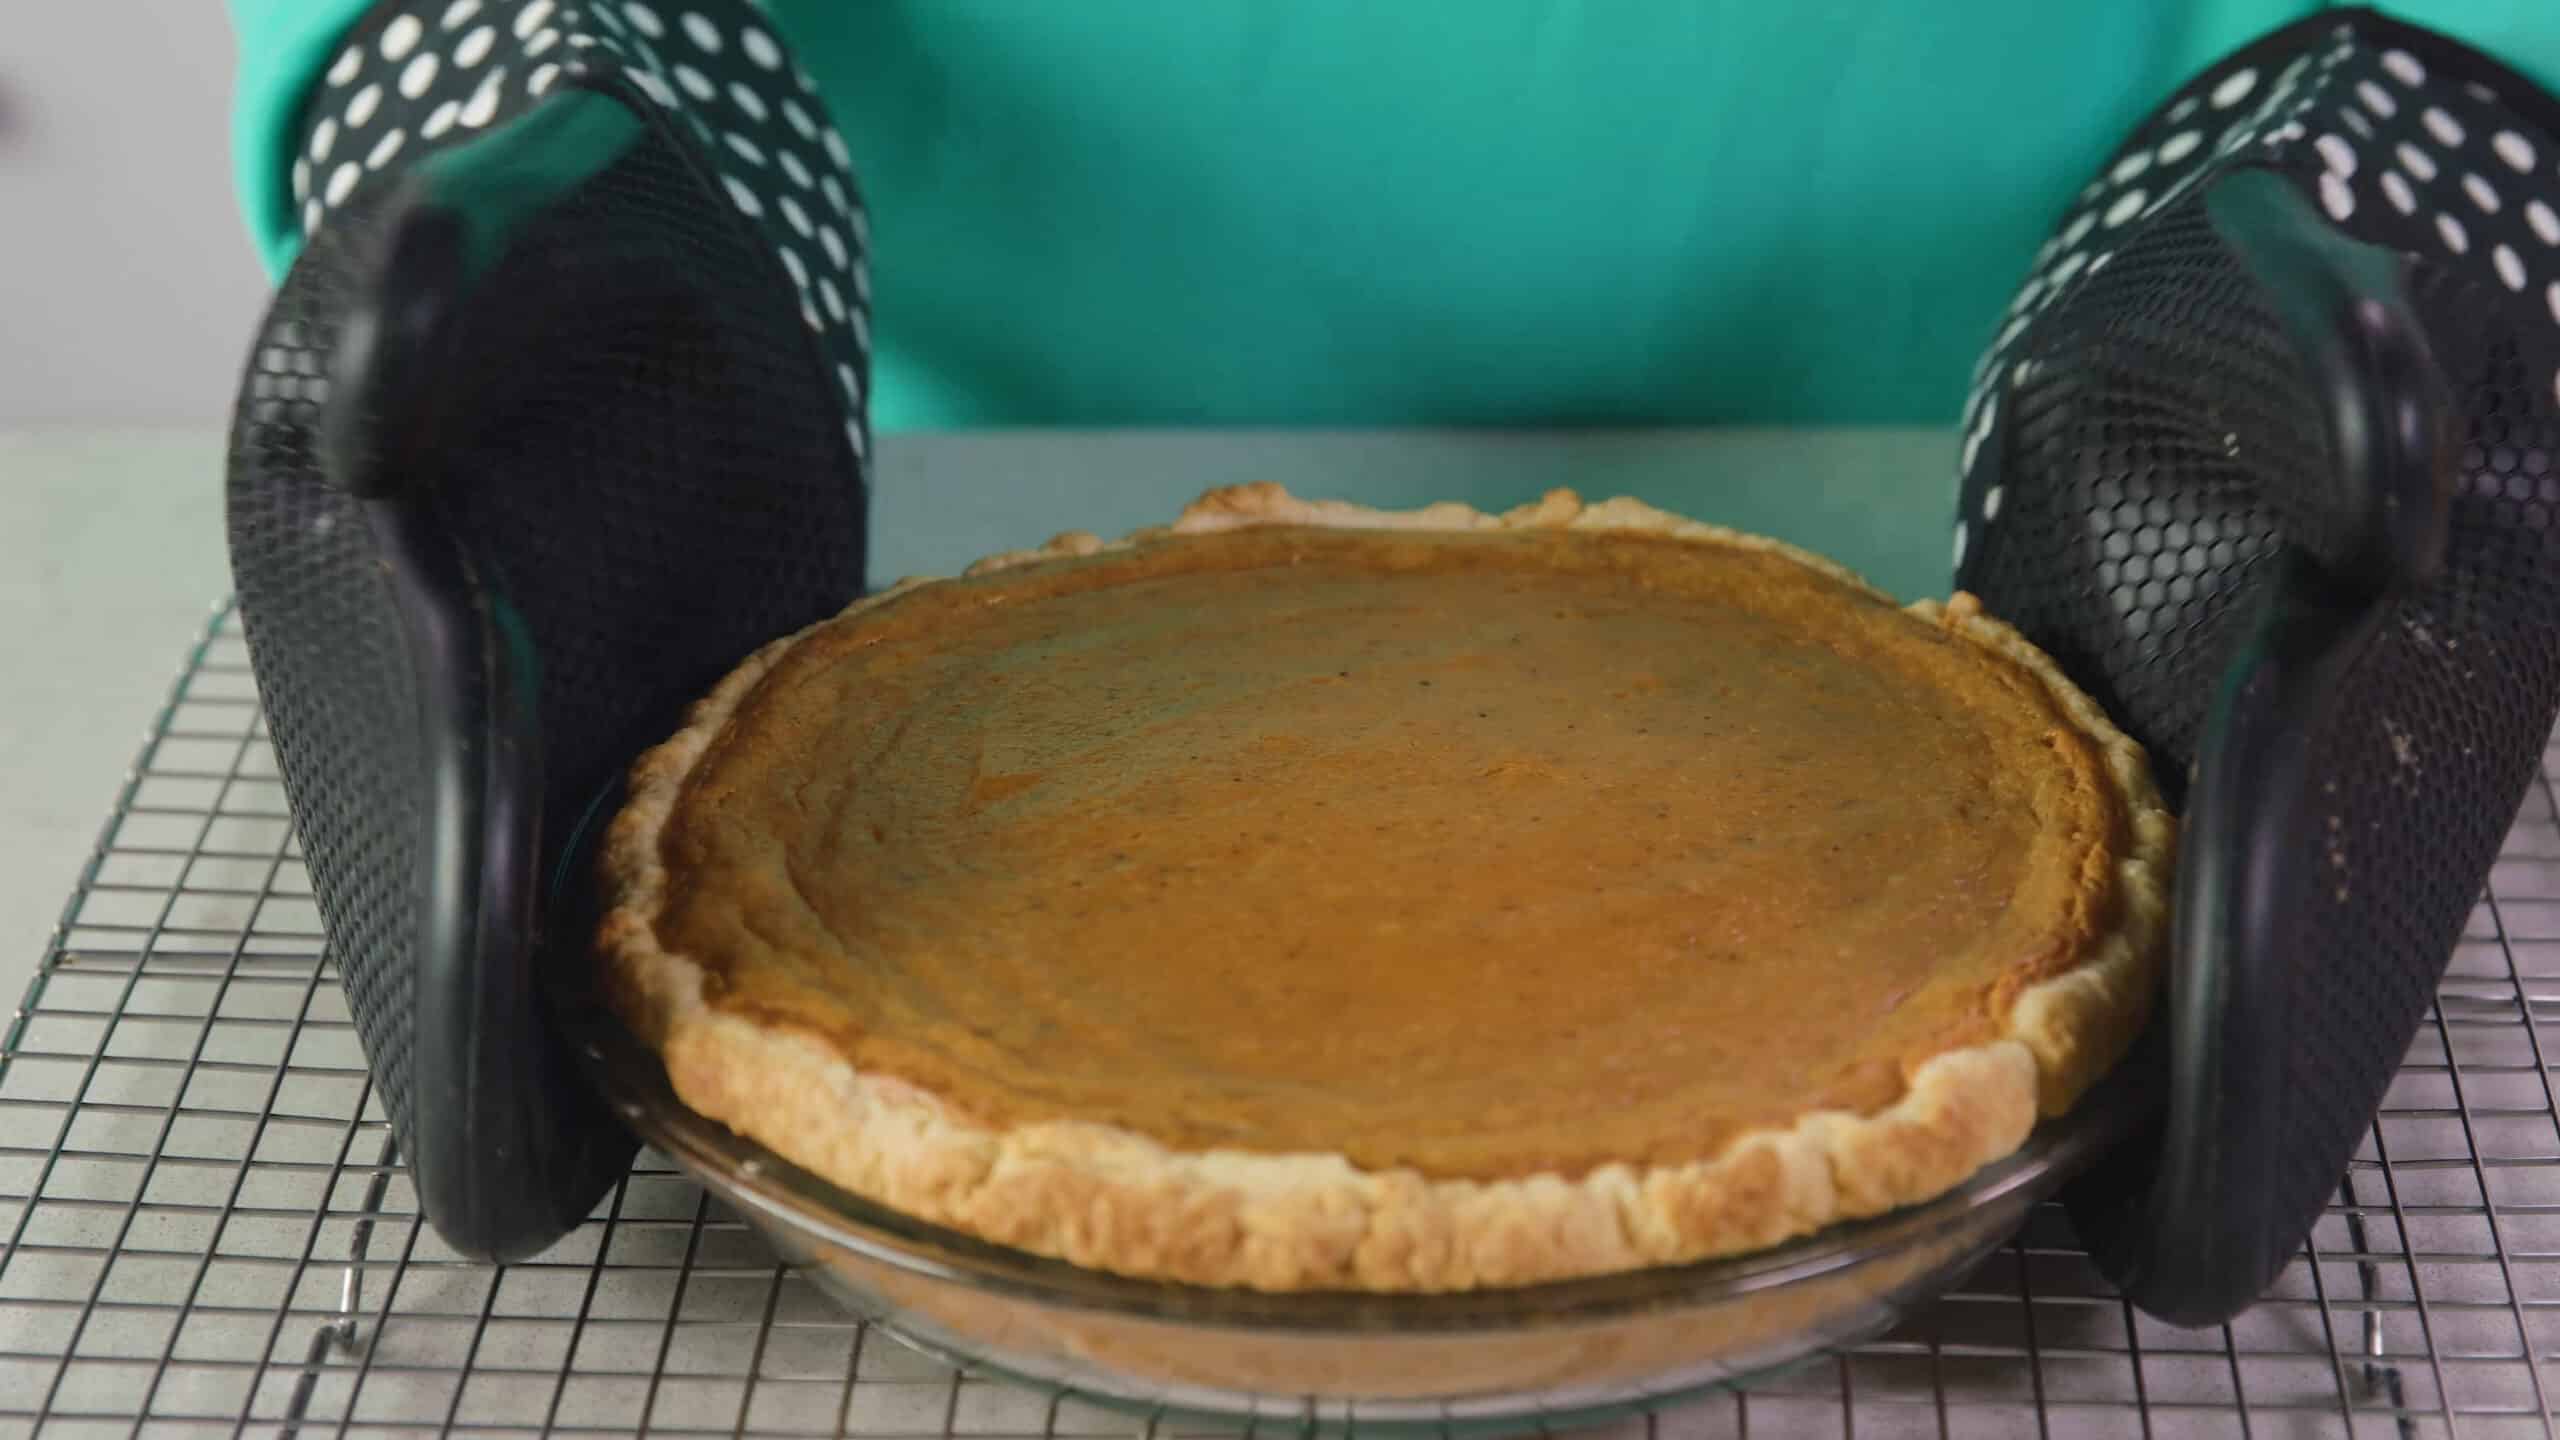 Angled view of clear glass pie plate with fully cooked sweet potato pie resting on cooling rack while on a marble countertop.